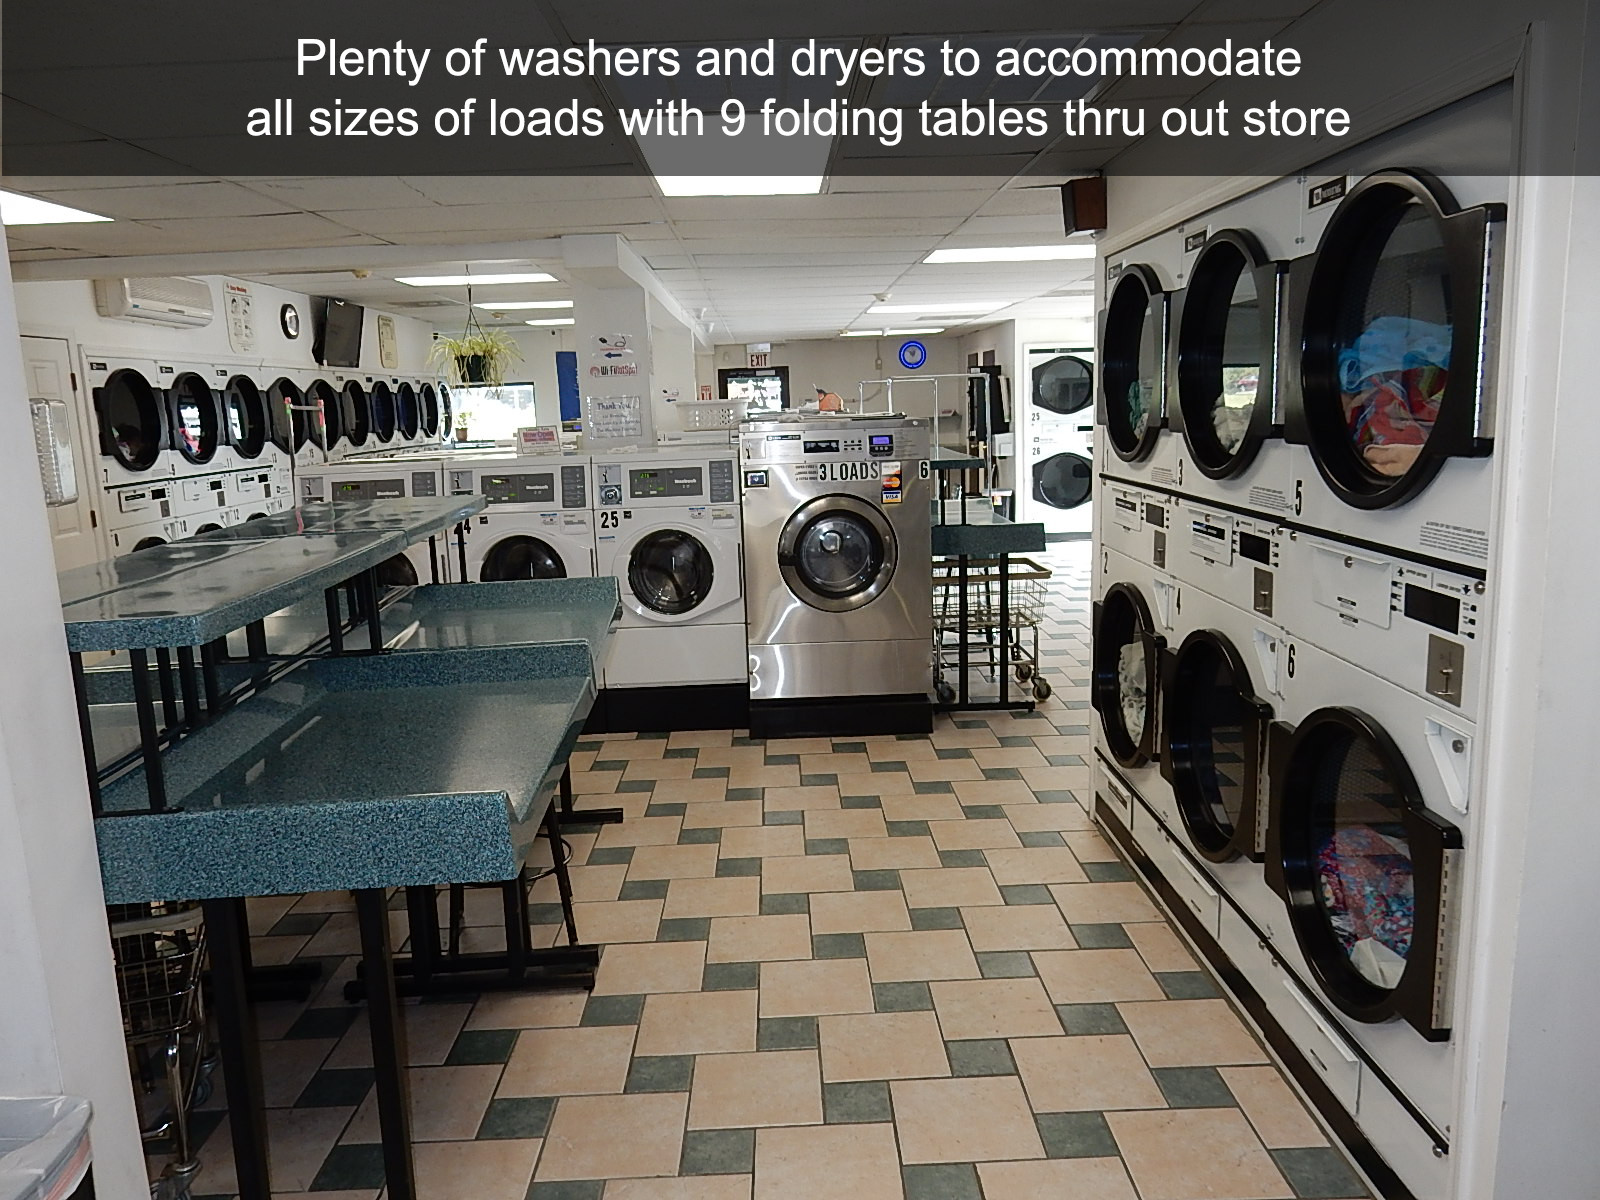 Plenty of washers and dryers to accommodate all sizes of loads with 9 folding tables thru out store